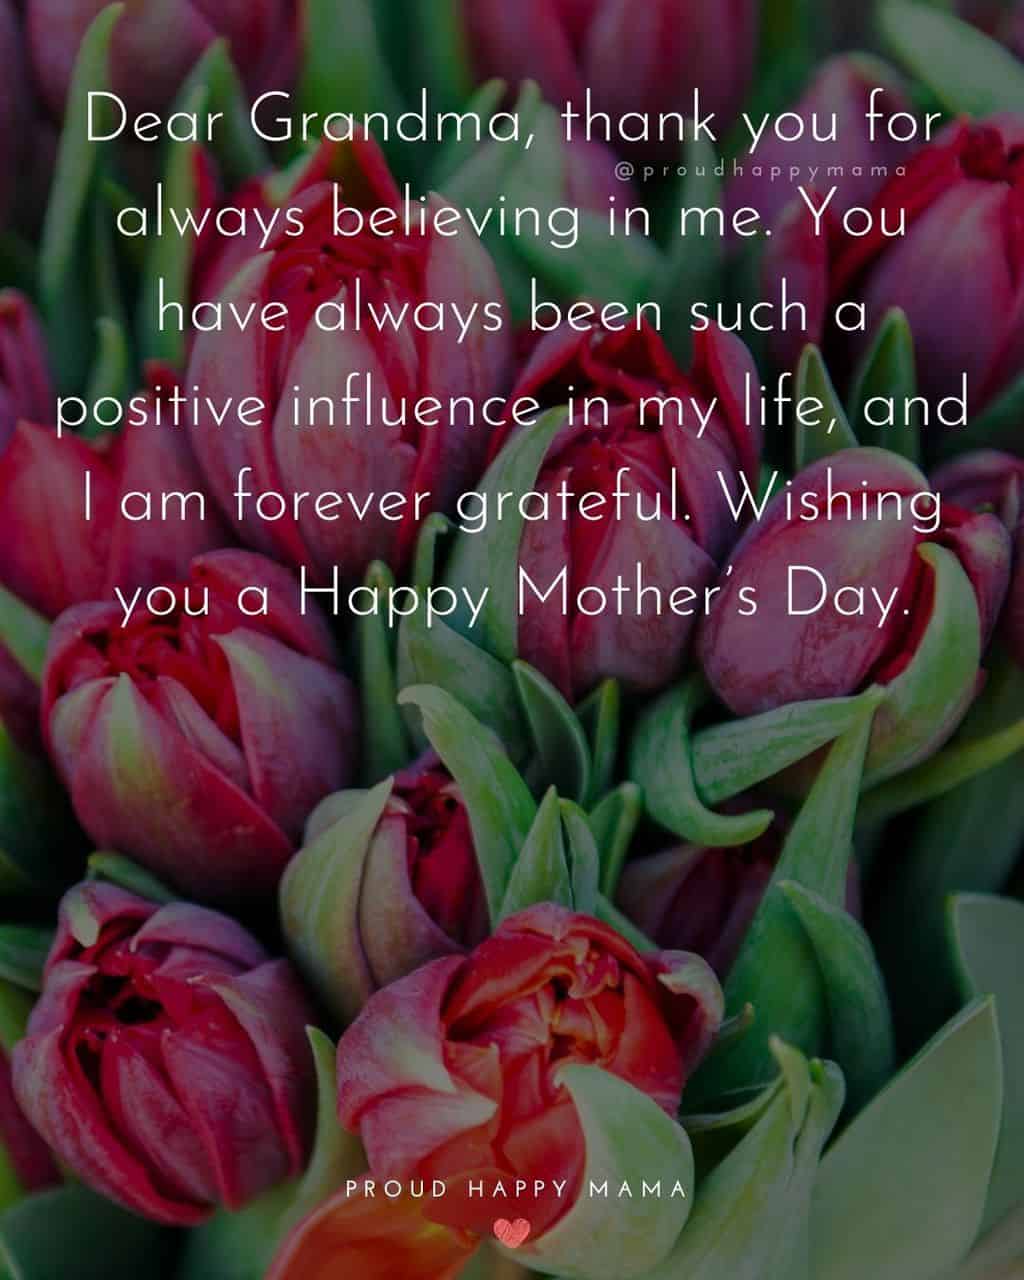 Happy Mothers Day Quotes To Grandma - Dear Grandma, thank you for always believing in me. You have always been such a